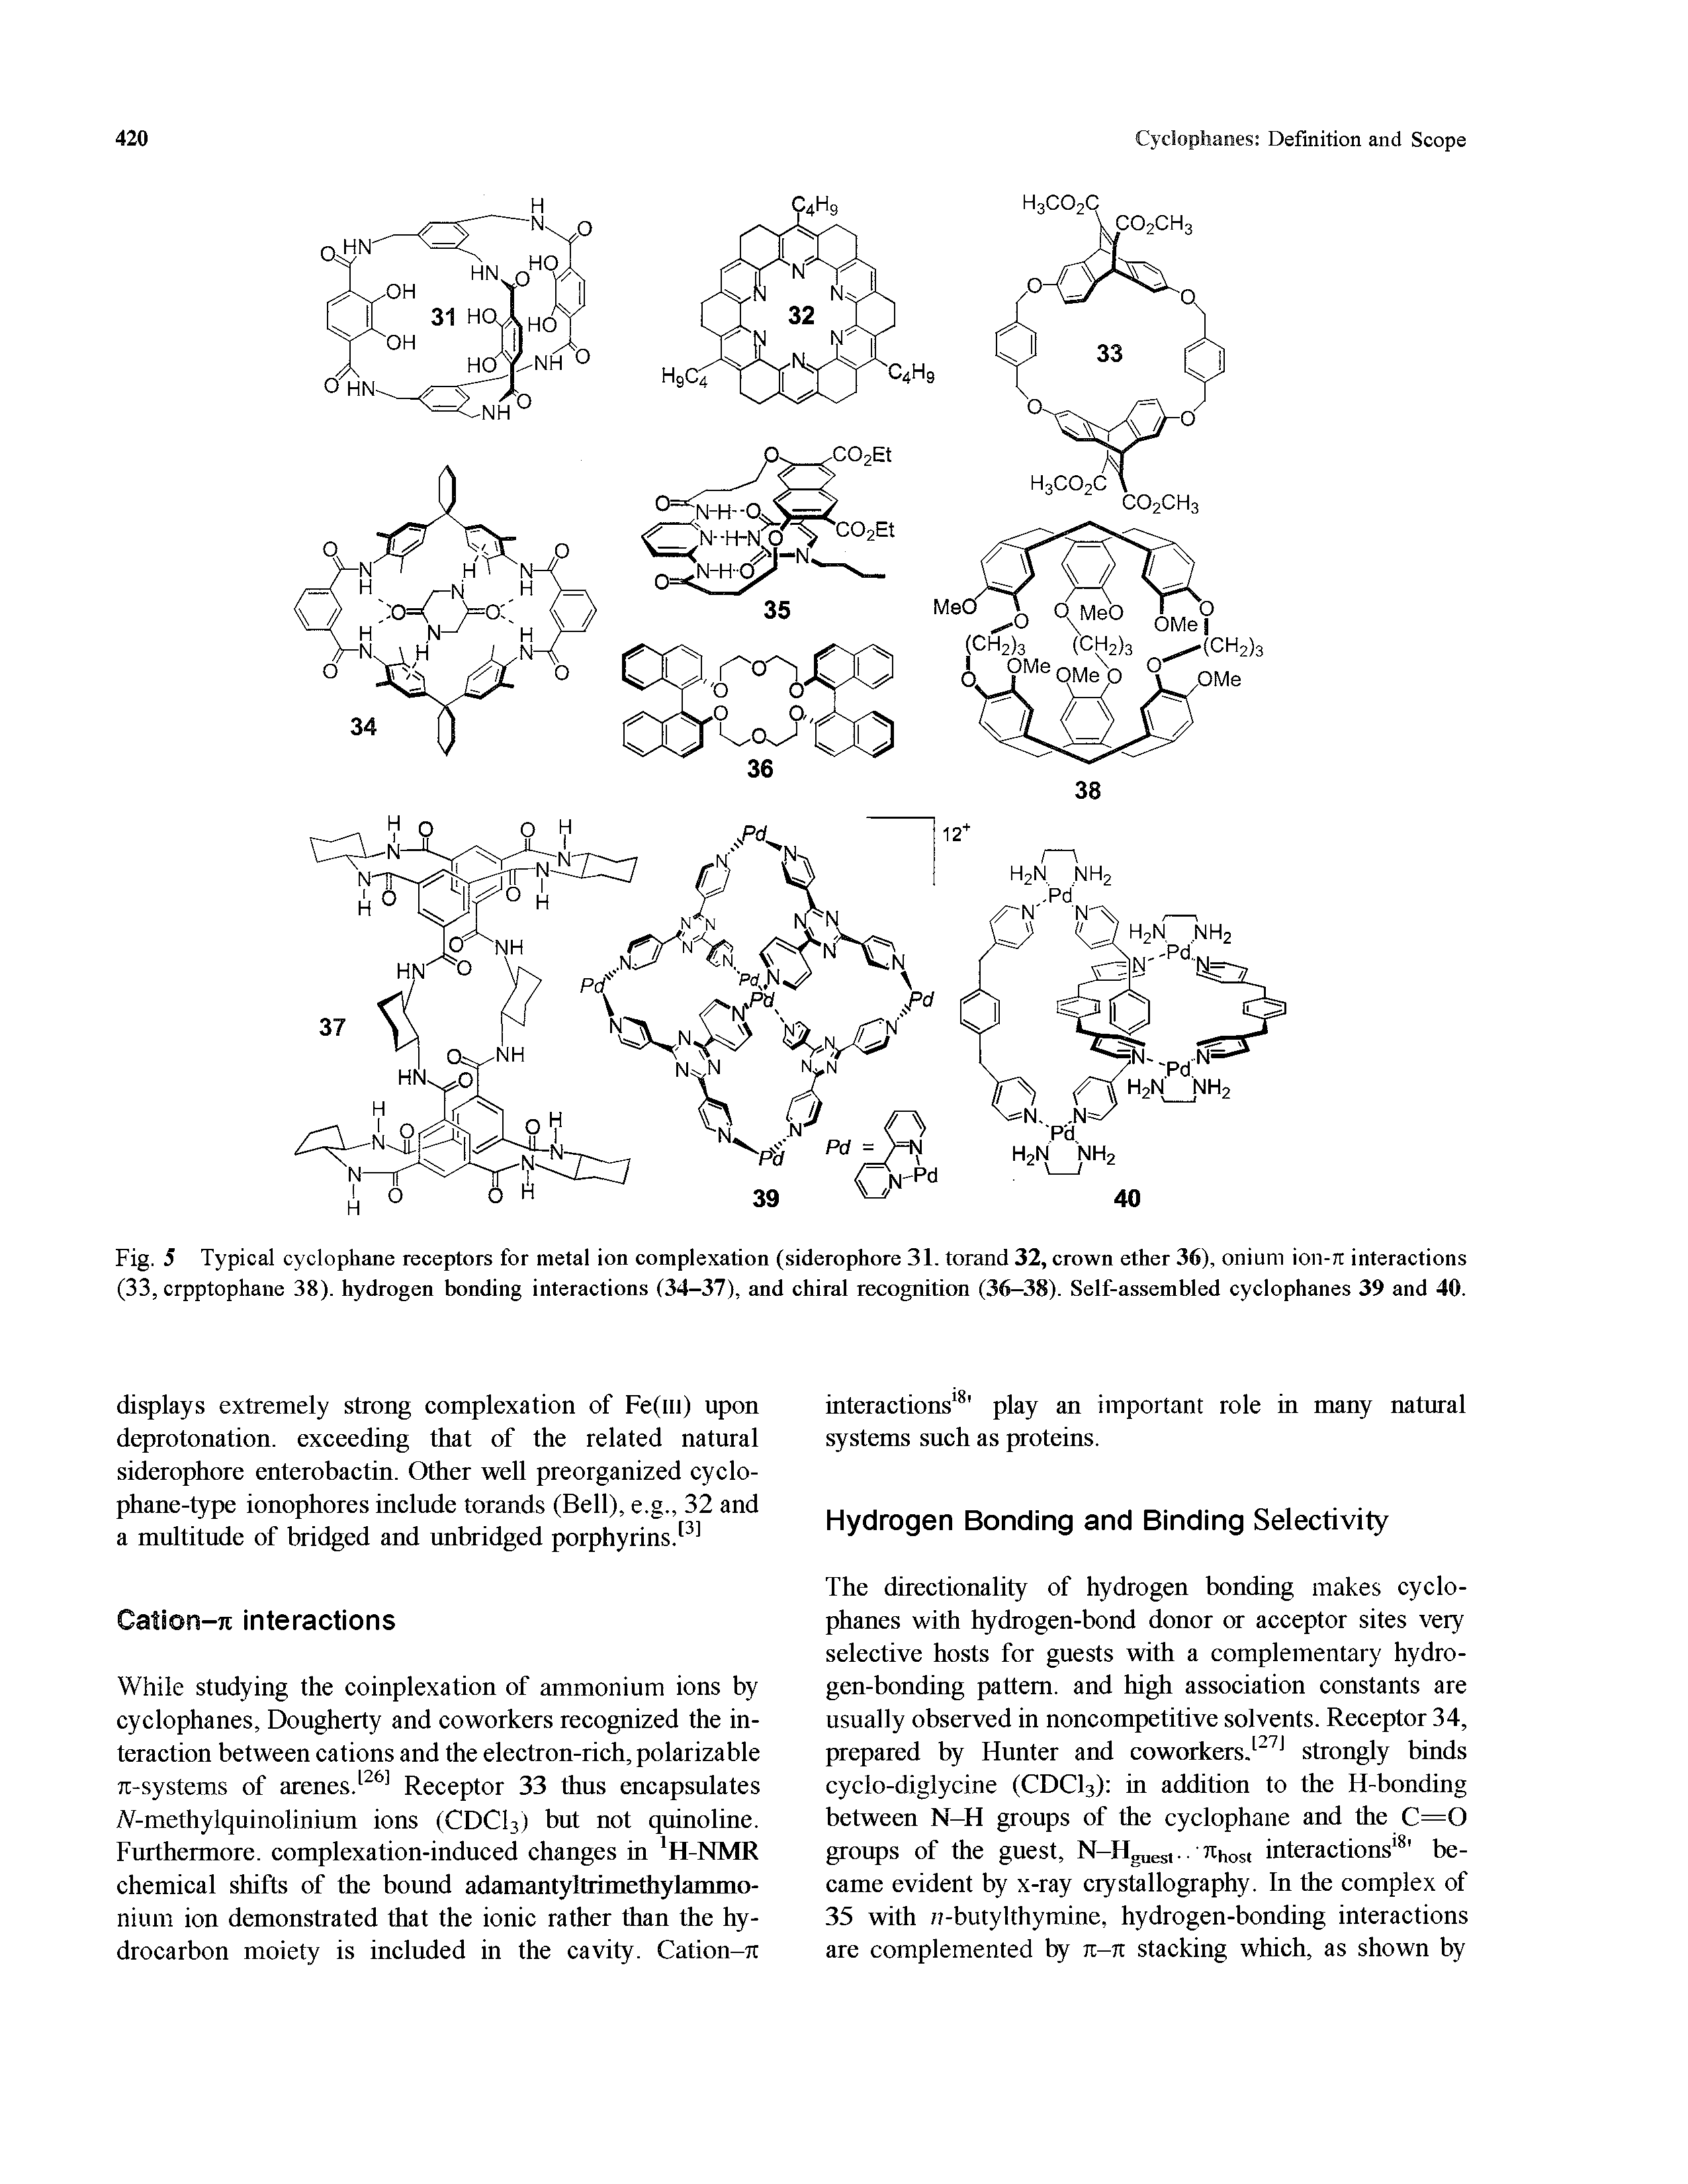 Fig. 5 Typical cyclophane receptors for metal ion complexation (siderophore 31. torand 32, crown ether 36), onium ion-rt interactions (33, crpptophane 38). hydrogen bonding interactions (34-37), and chiral recognition (36-38). Self-assembled cyclophanes 39 and 40.